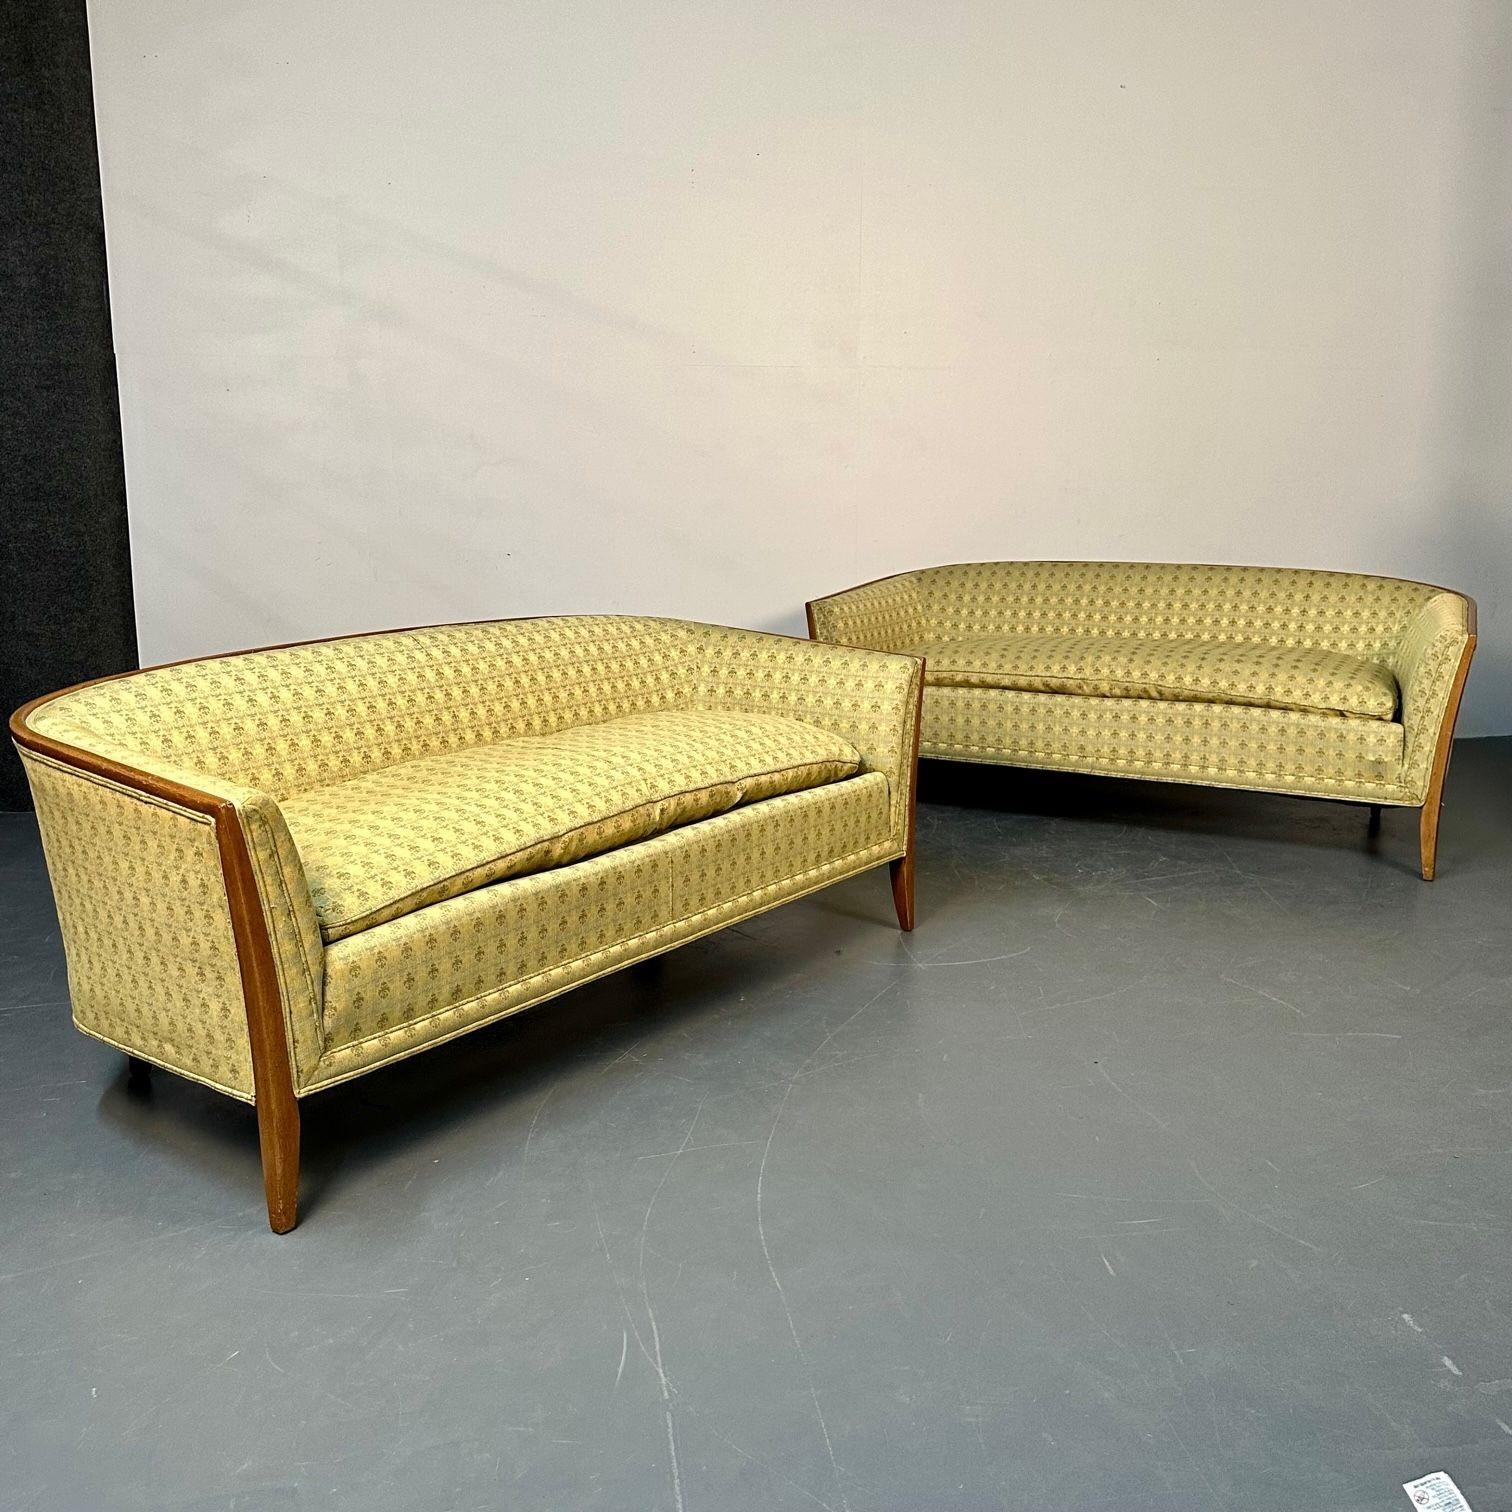 Pair Curved Mid-Century Modern Sofas / Settees Labeled John Stuart, Walnut

Irwin Furniture Company settees or loveseats designed by John Stuart. Both bearing labels. The pair having lovely sleek frames covered in a clean modern textile. A fine